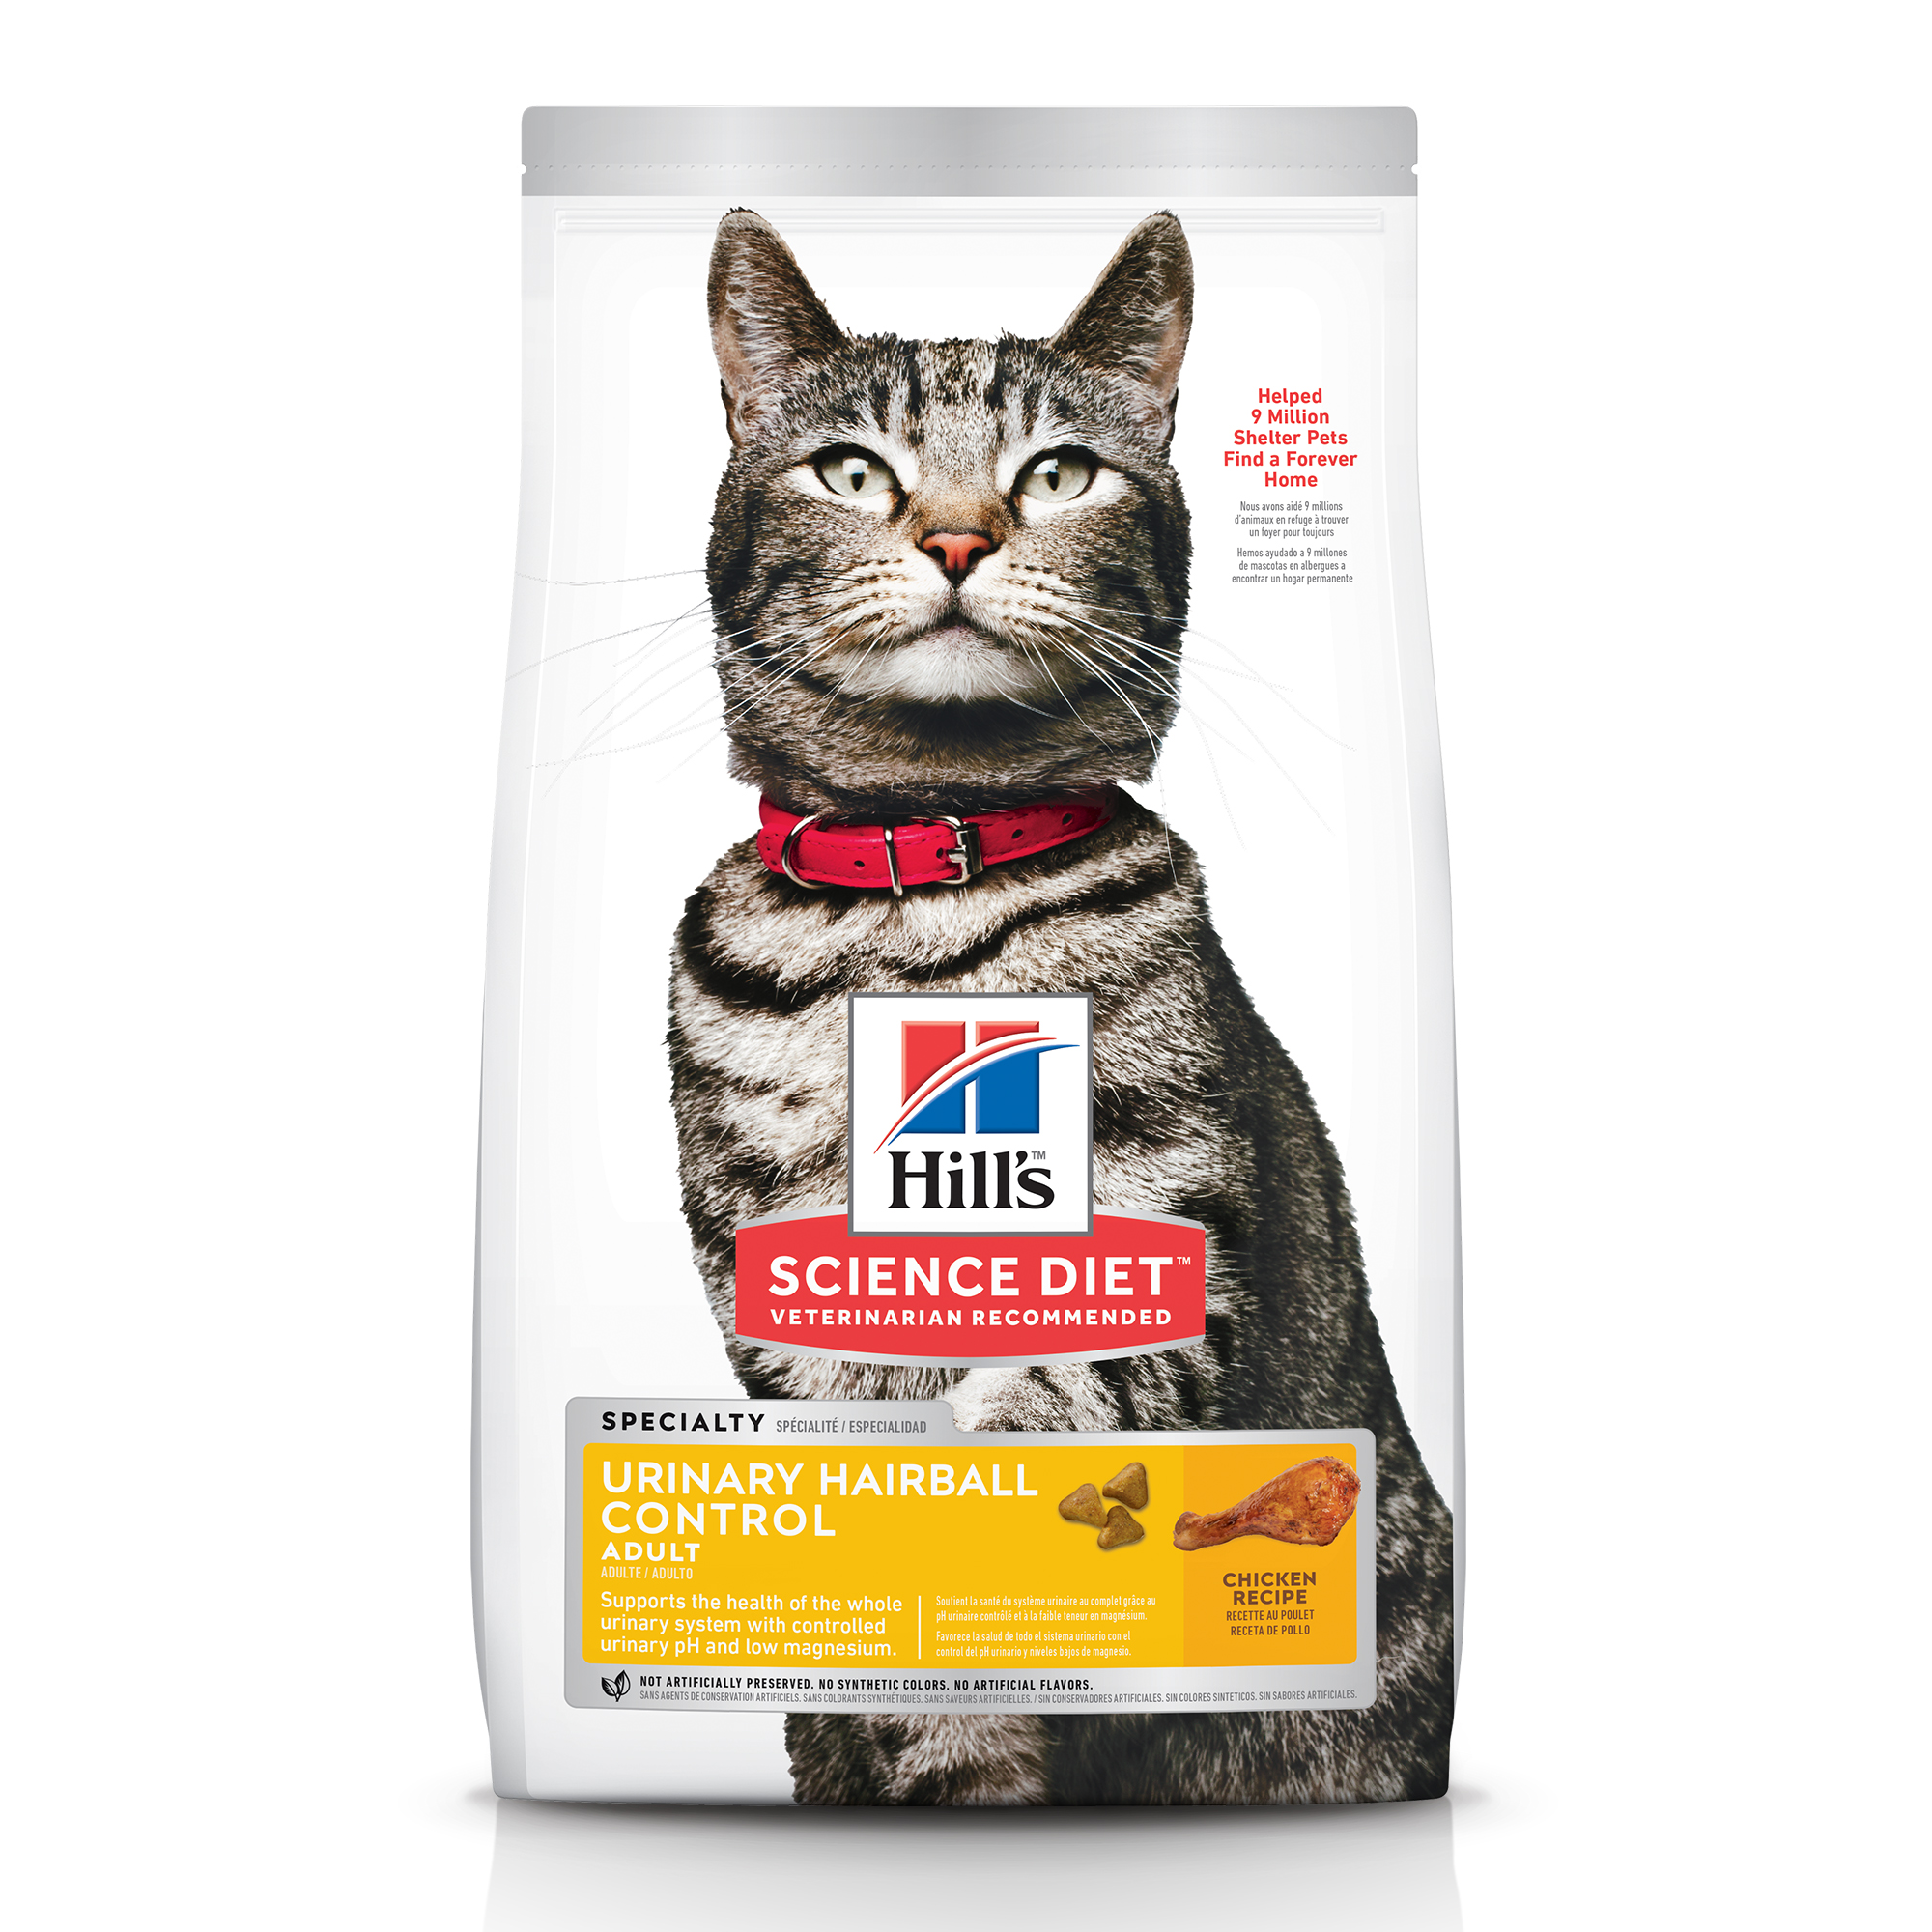 Hill's Science Diet Adult Urinary & Hairball Control Chicken Recipe Dry Cat Food, 7 lb bag - image 1 of 9